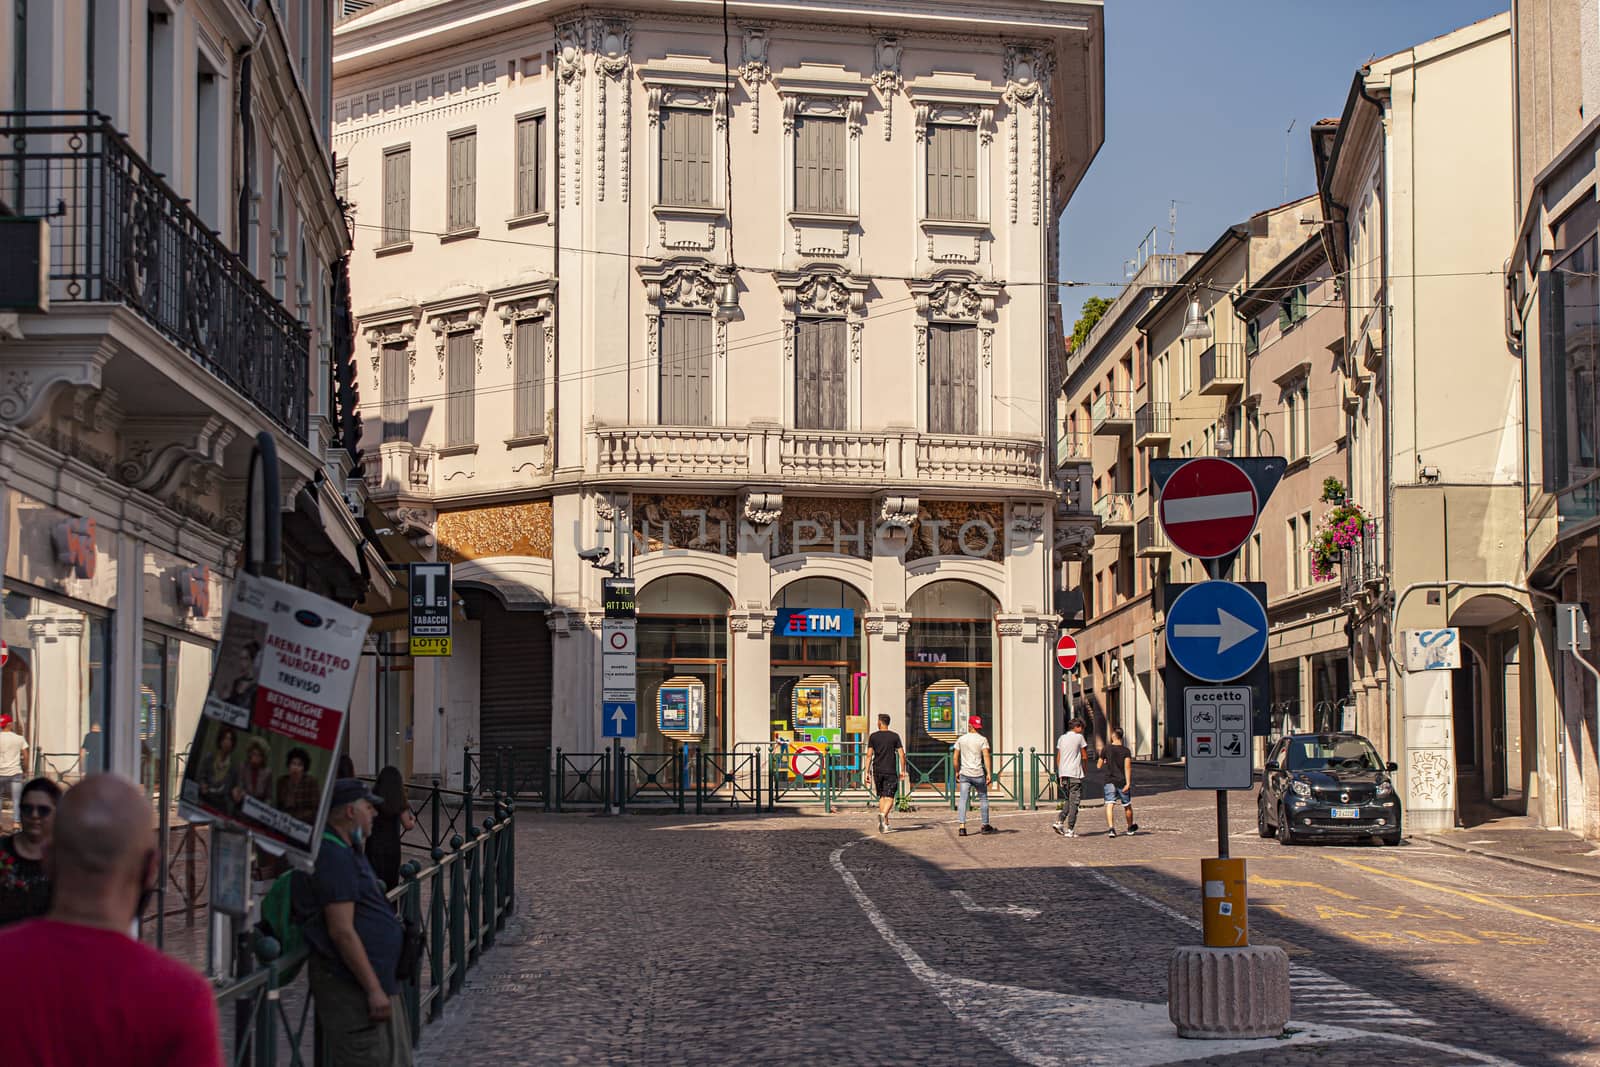 TREVISO, ITALY 13 AUGUST 2020: Landscape of buildings in Treviso in Italy